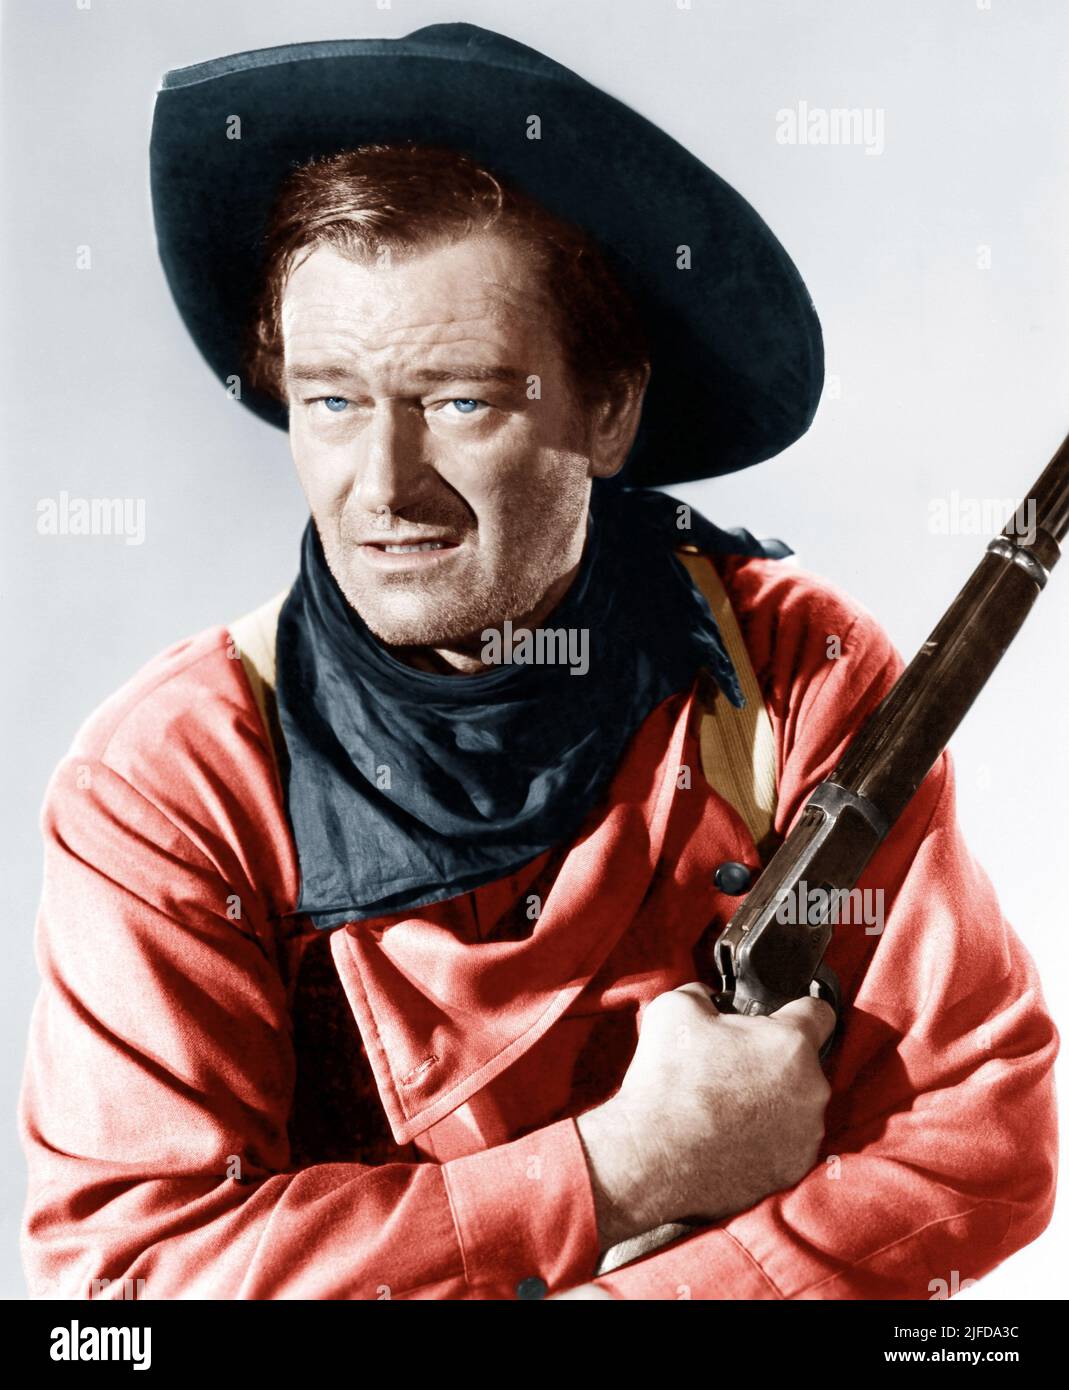 JOHN WAYNE in THE SEARCHERS (1956), directed by JOHN FORD. Credit: WARNER BROTHERS / Album Stock Photo